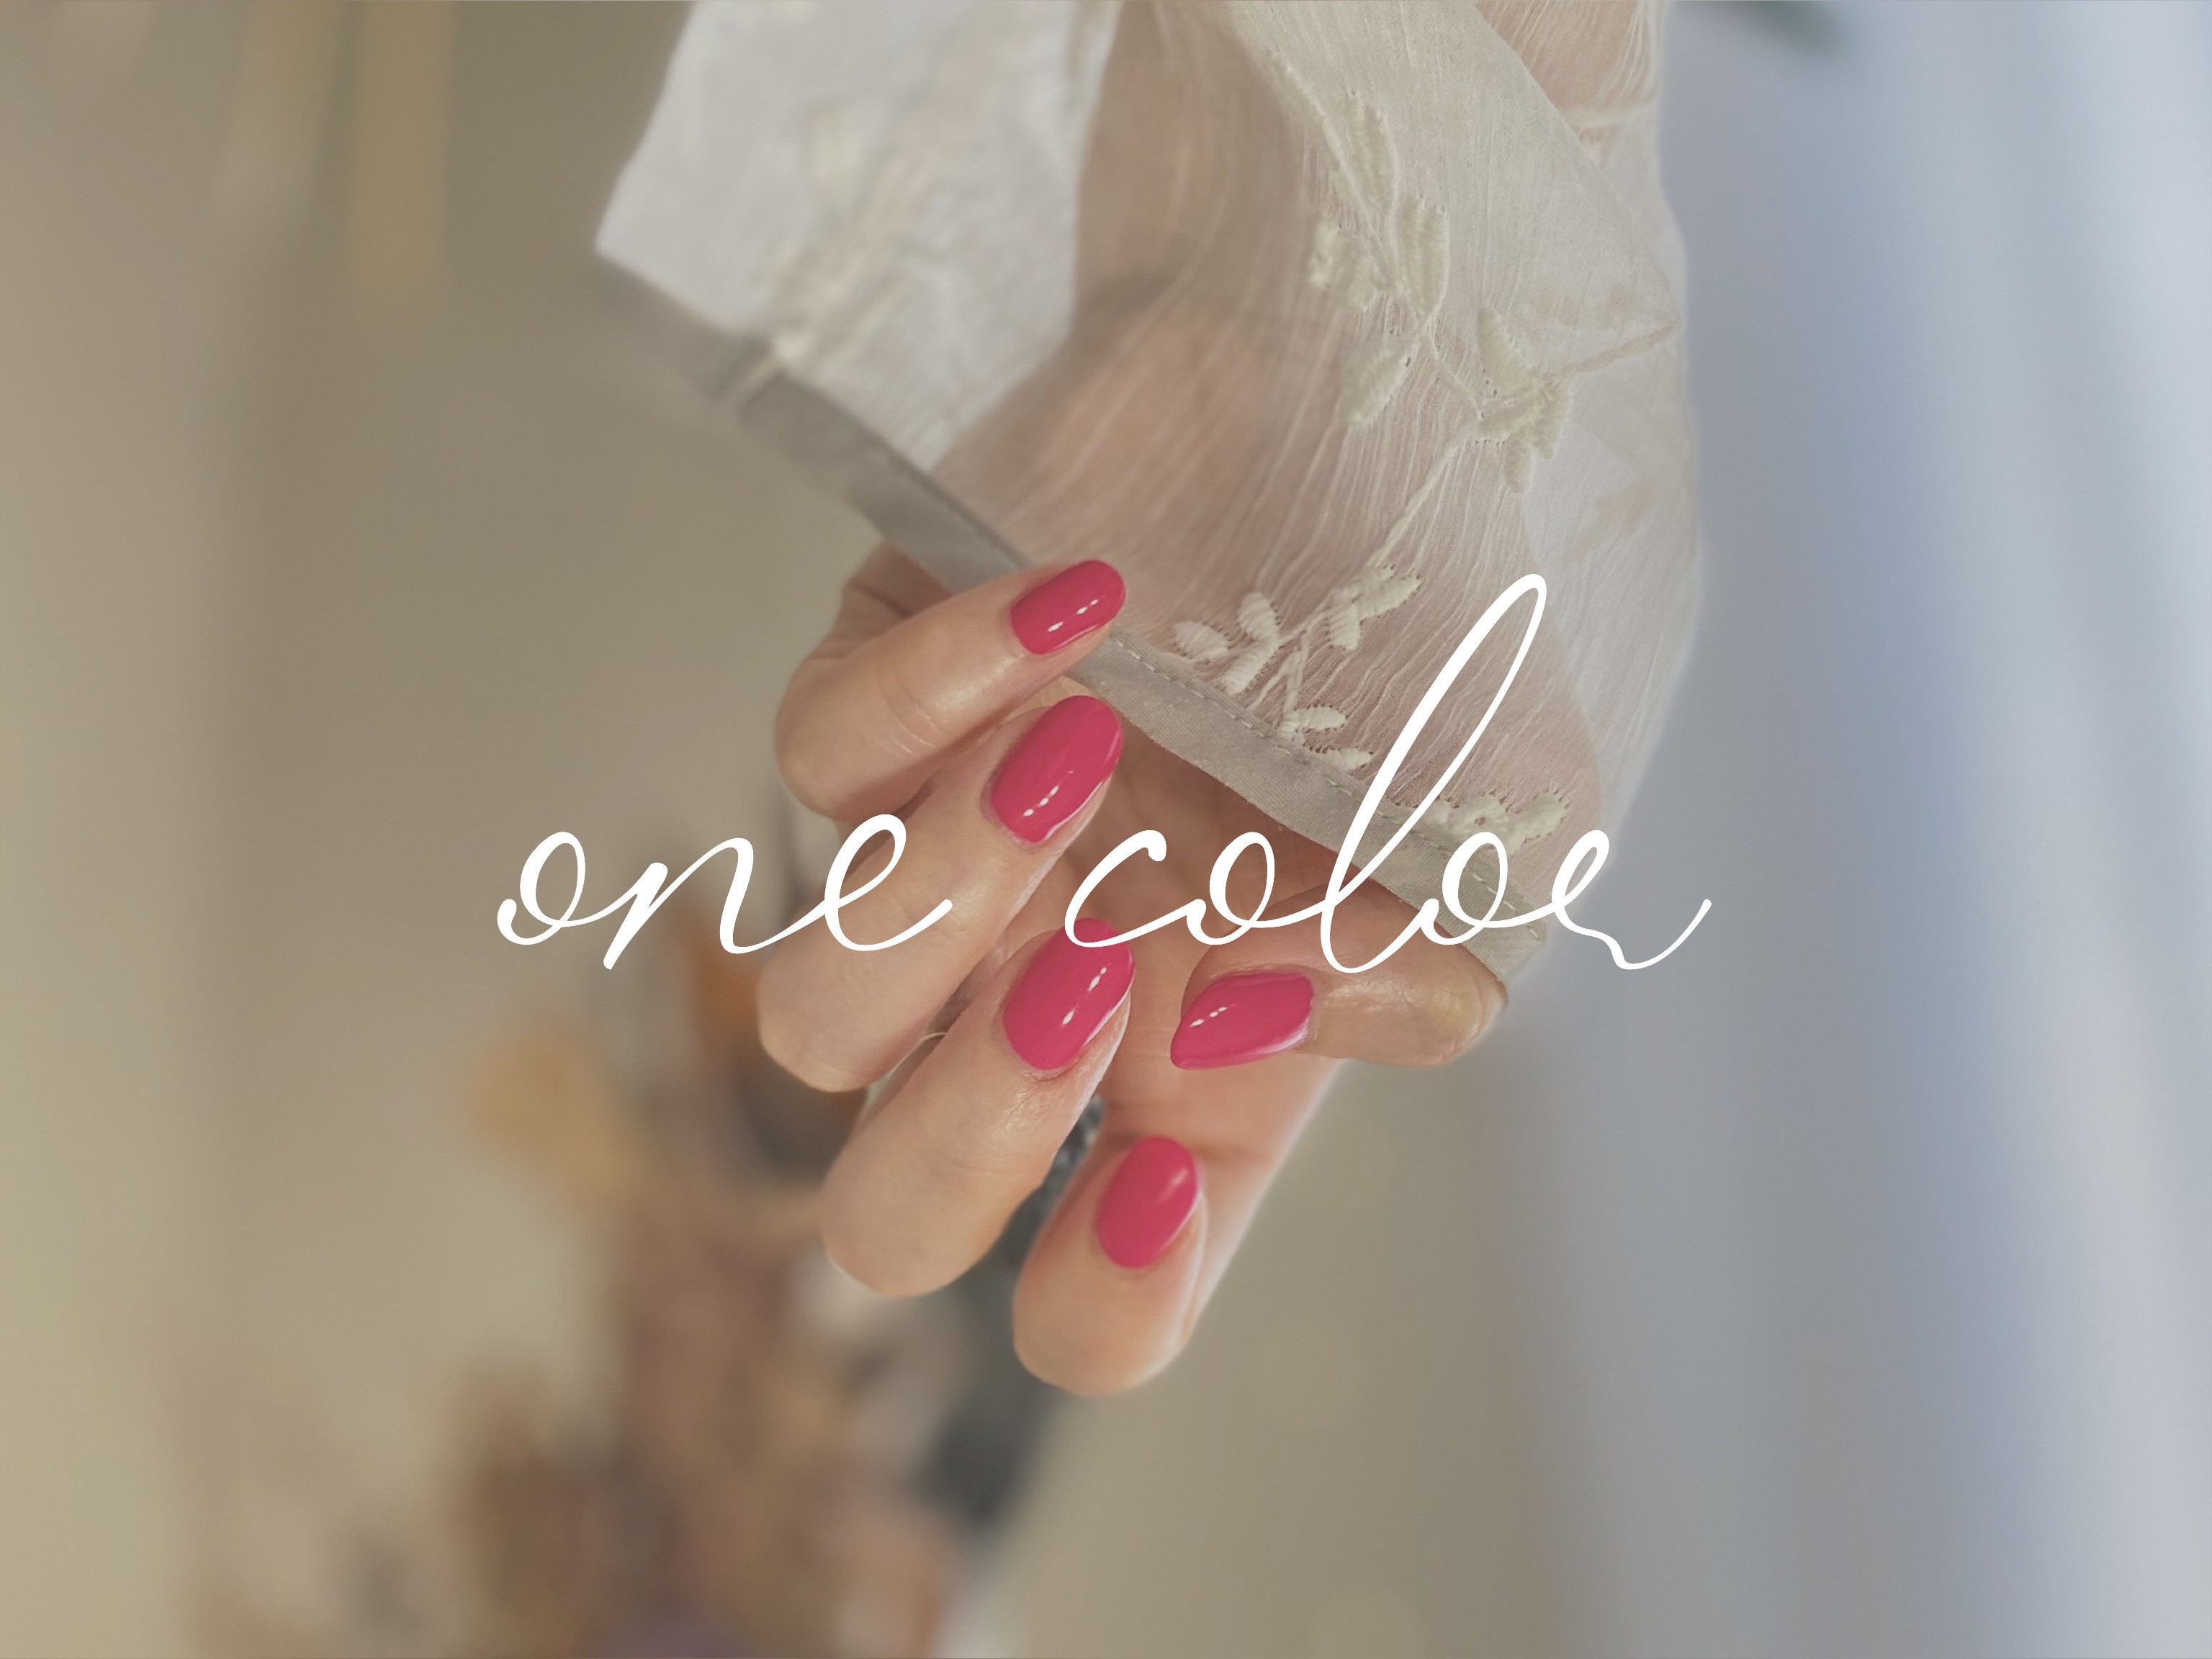 ONE COLOR